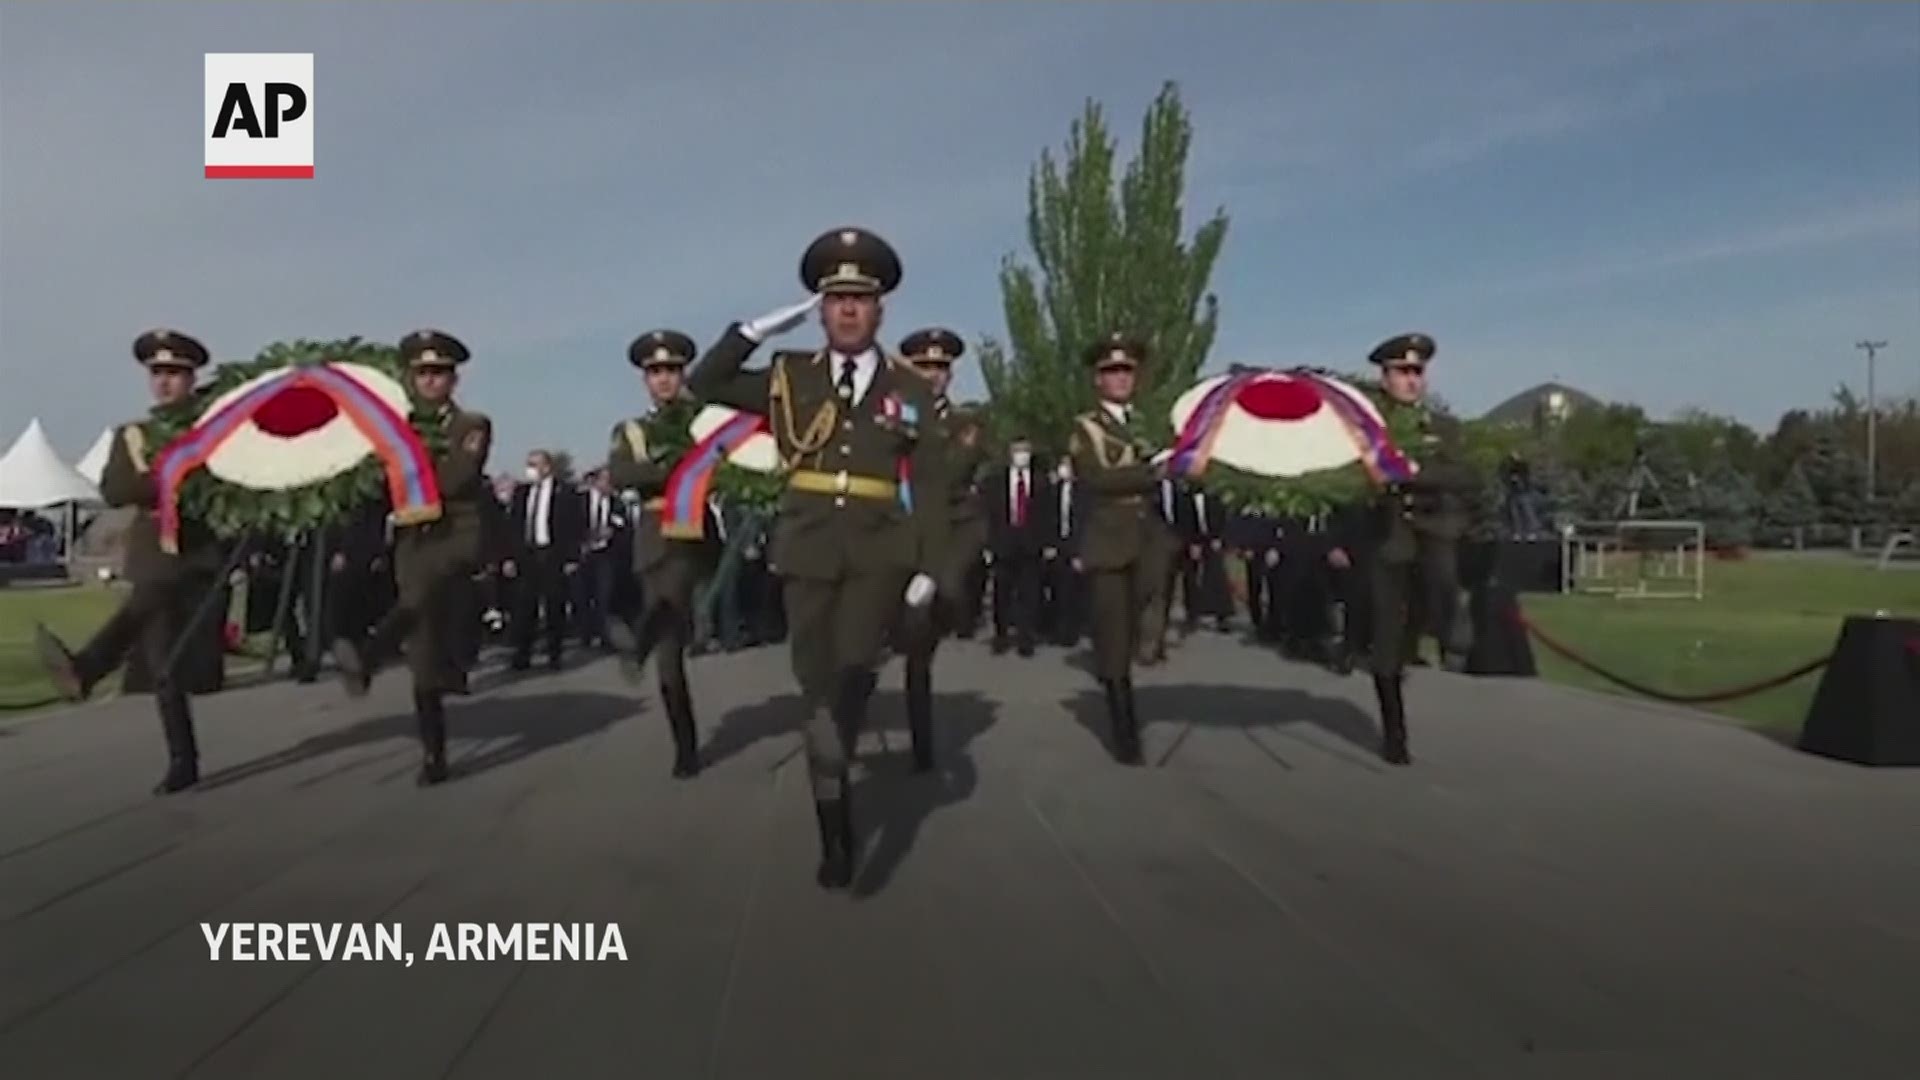 Armenian officials laid wreaths at the country's memorial to commemorate the 1.5 million Armenians who were killed in Ottoman Turkey 106 years ago on Saturday.